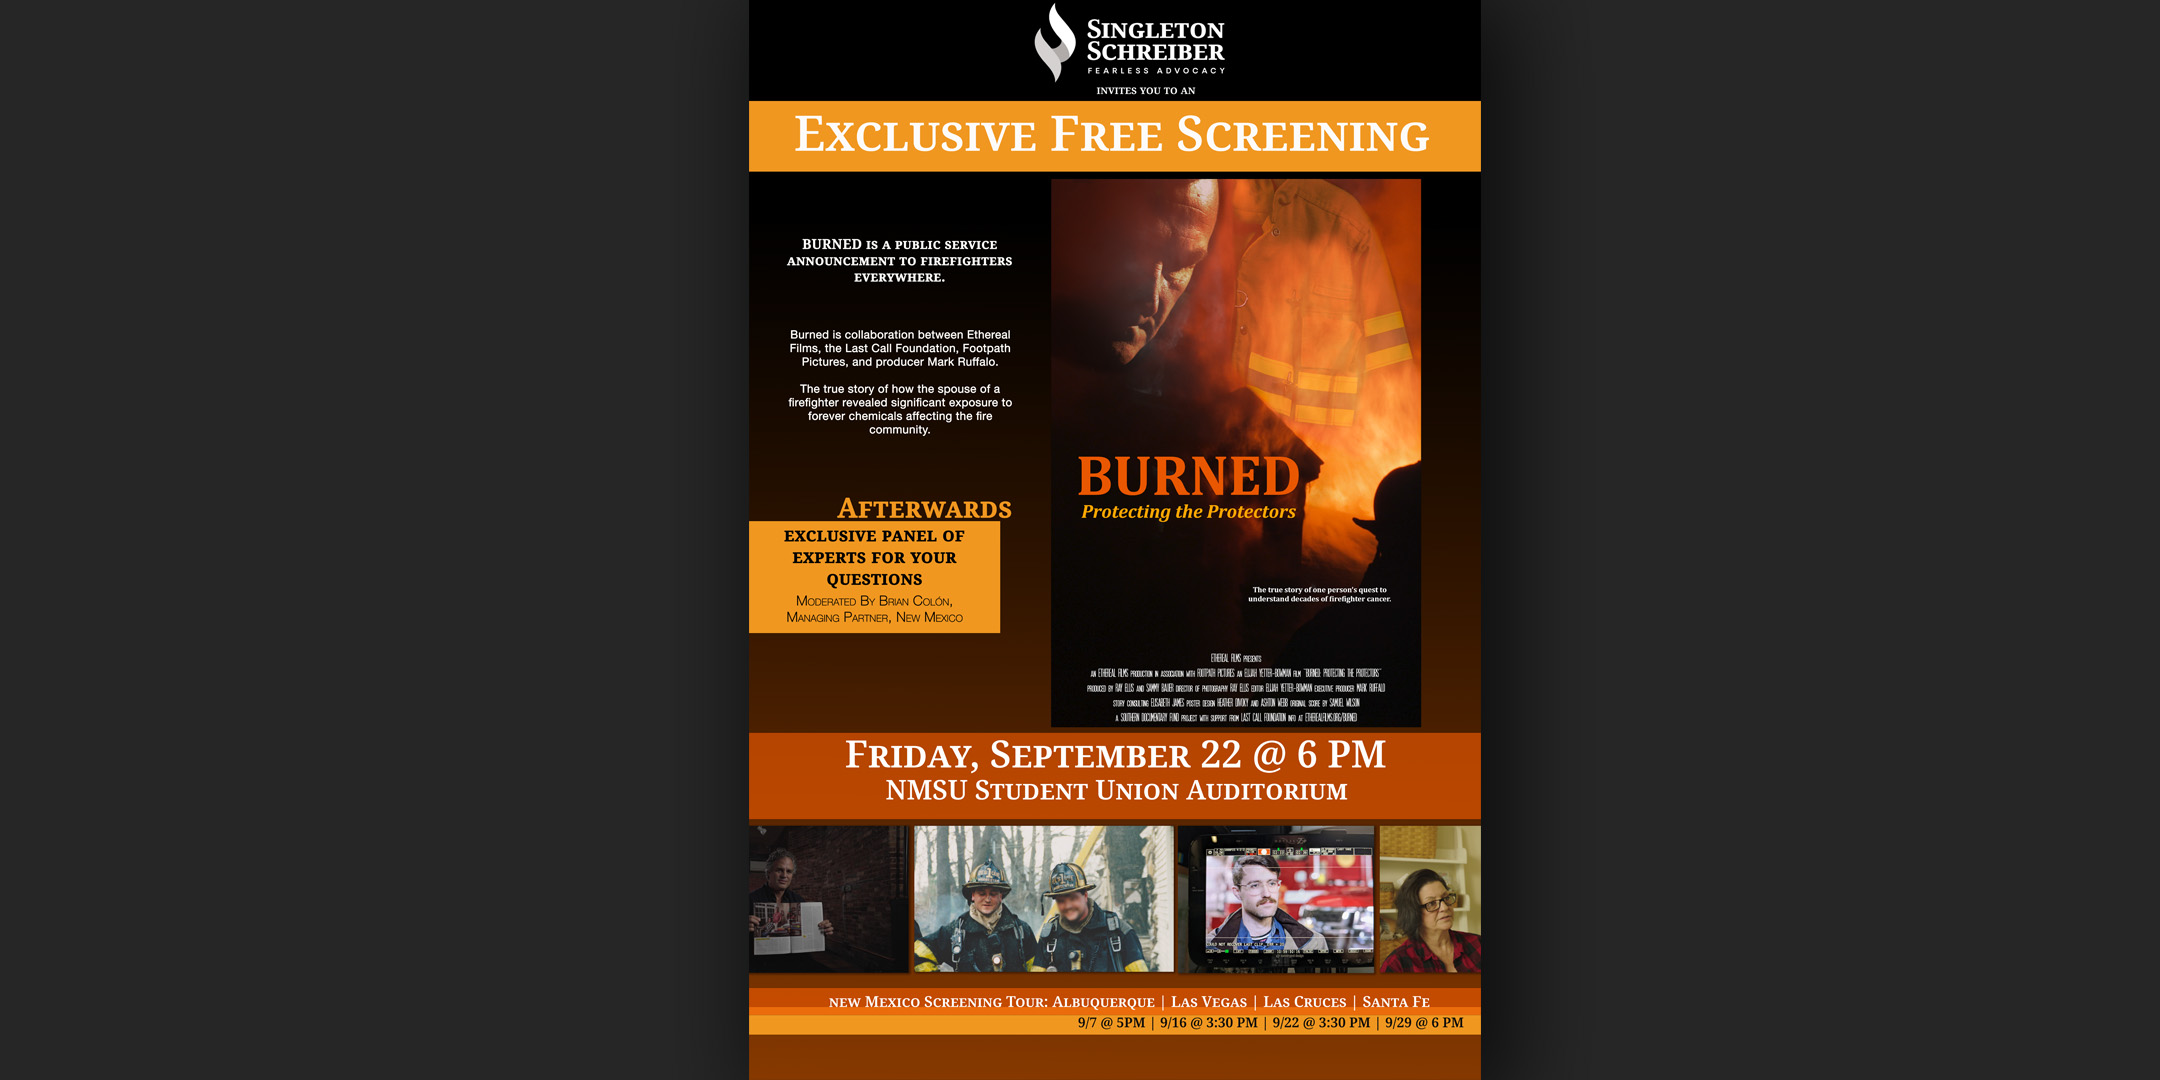 Burned: Protecting the Protectors (Las Cruces, NM: Free Screening)